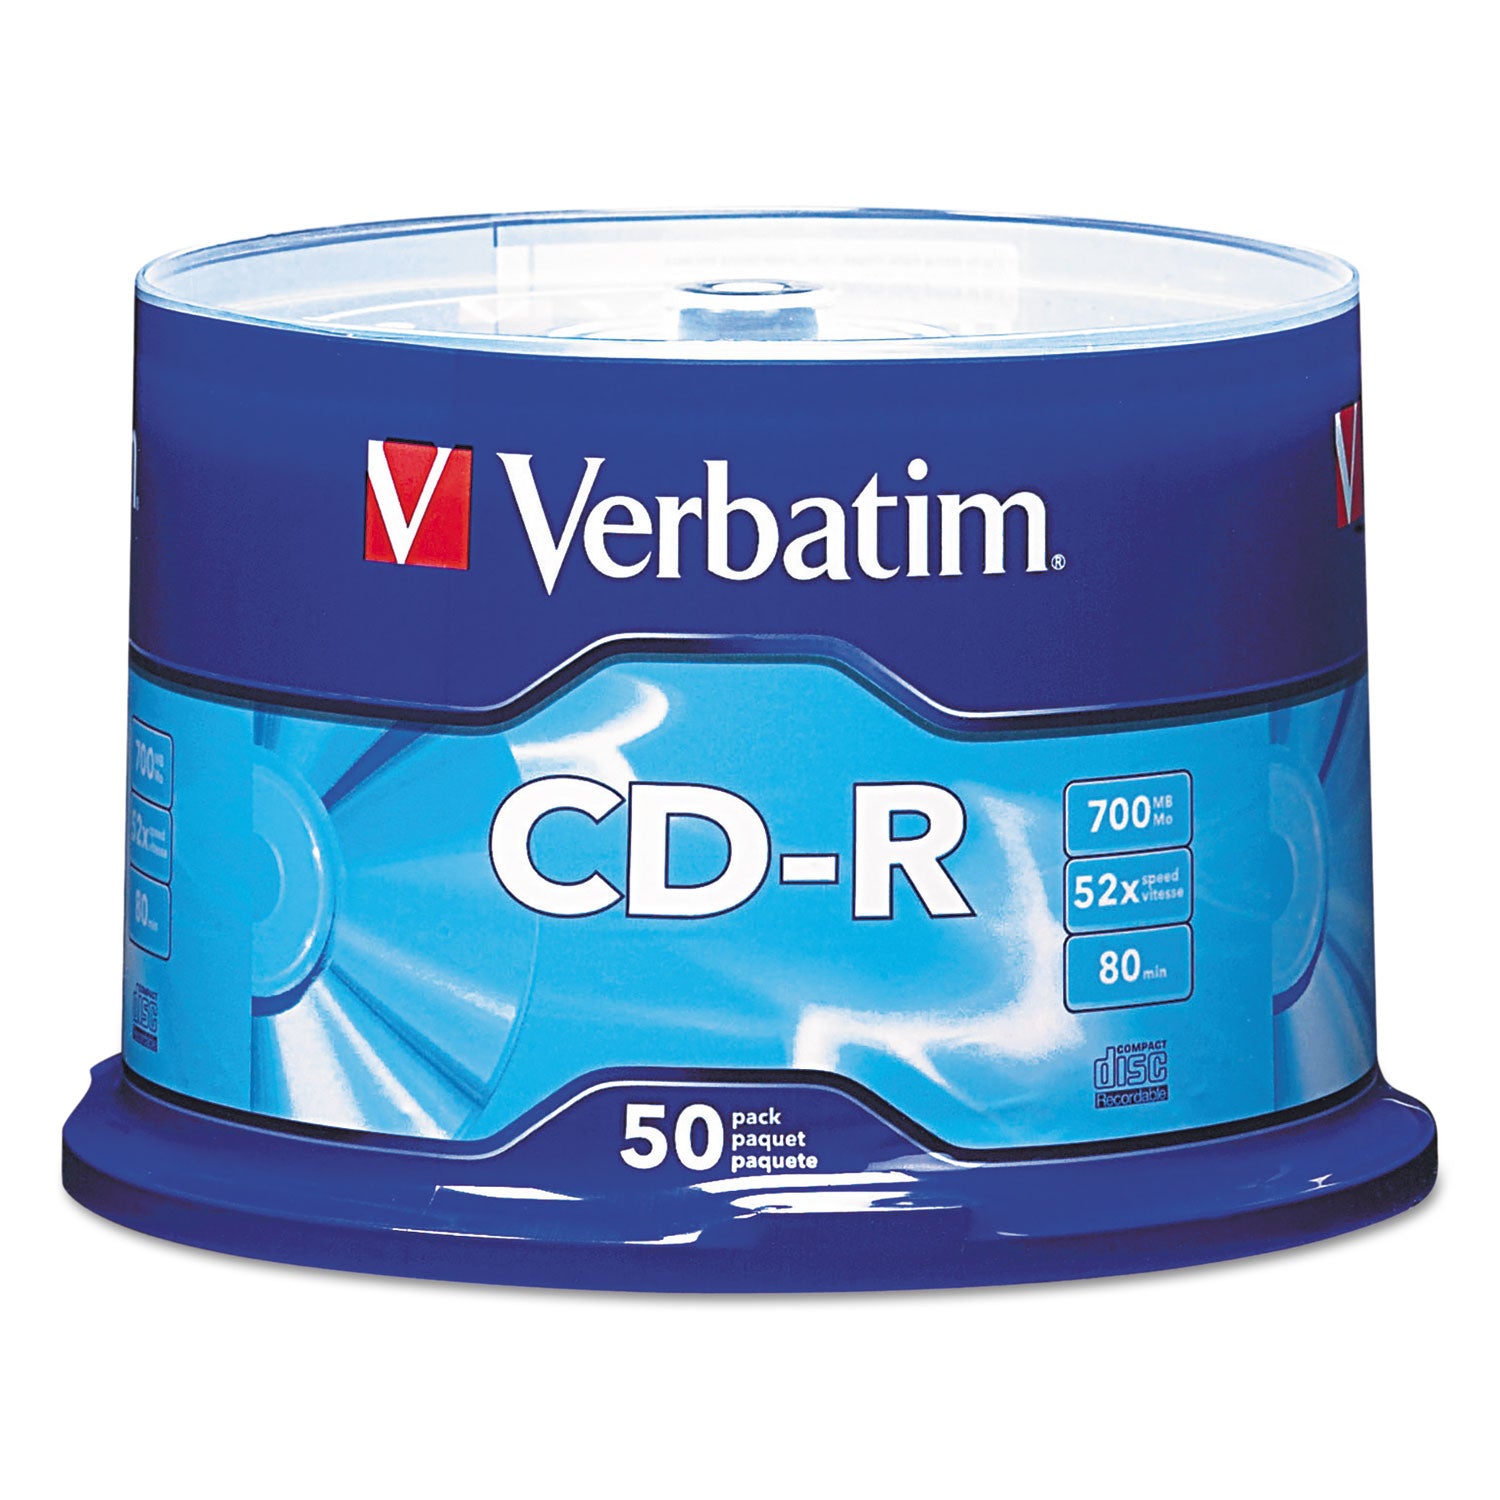 CD-R Recordable Disc, 700 MB/80min, 52x, Spindle, Silver, 50/Pack - 